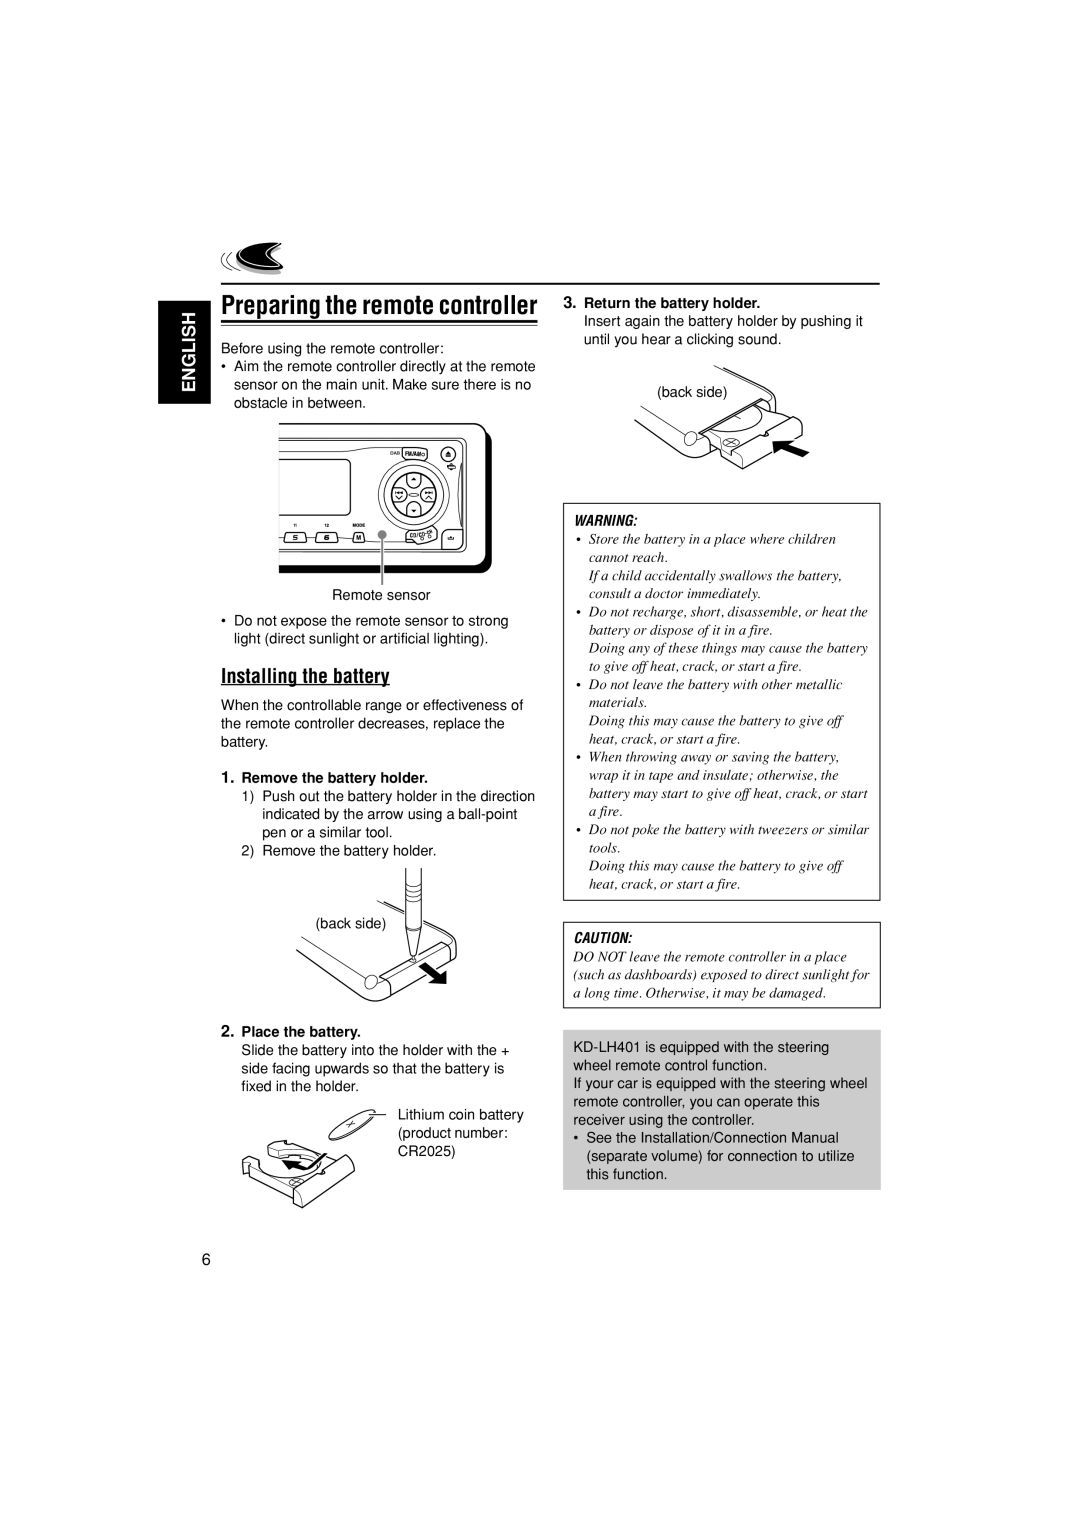 JVC KD-LH401 service manual Preparing the remote controller, Installing the battery, English, Remove the battery holder 